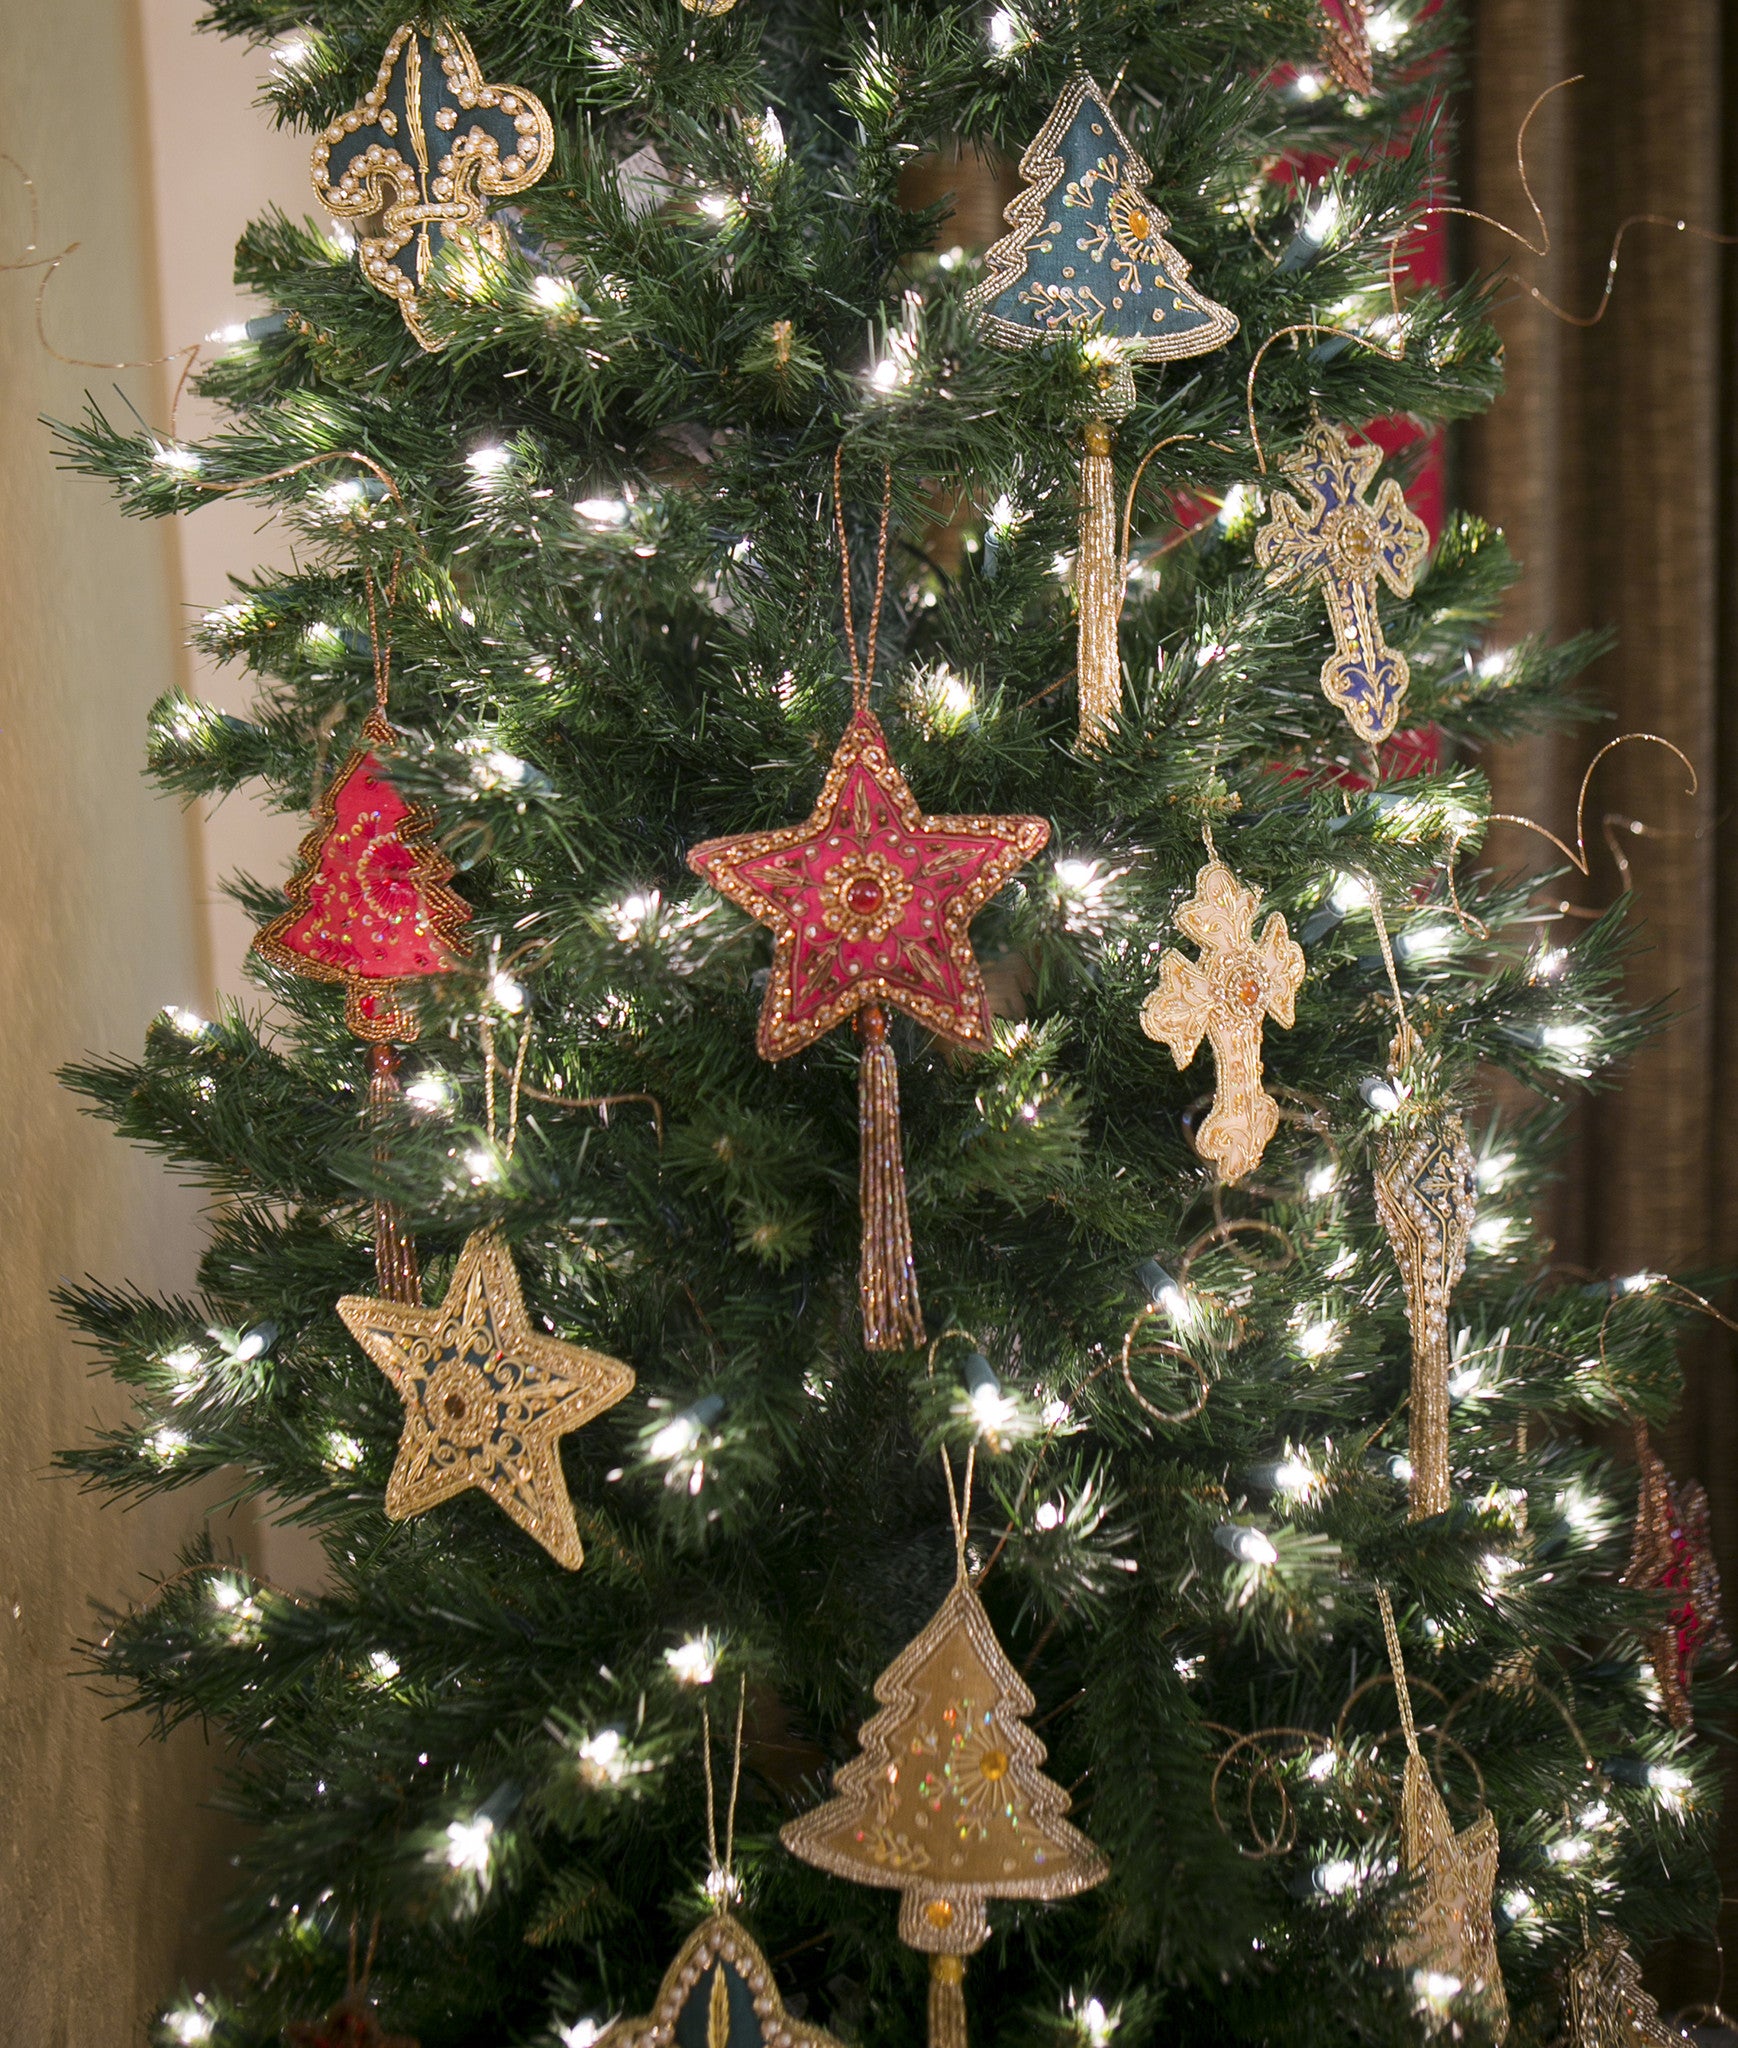 These ornaments will add sparkle and shine to your Christmas tree!